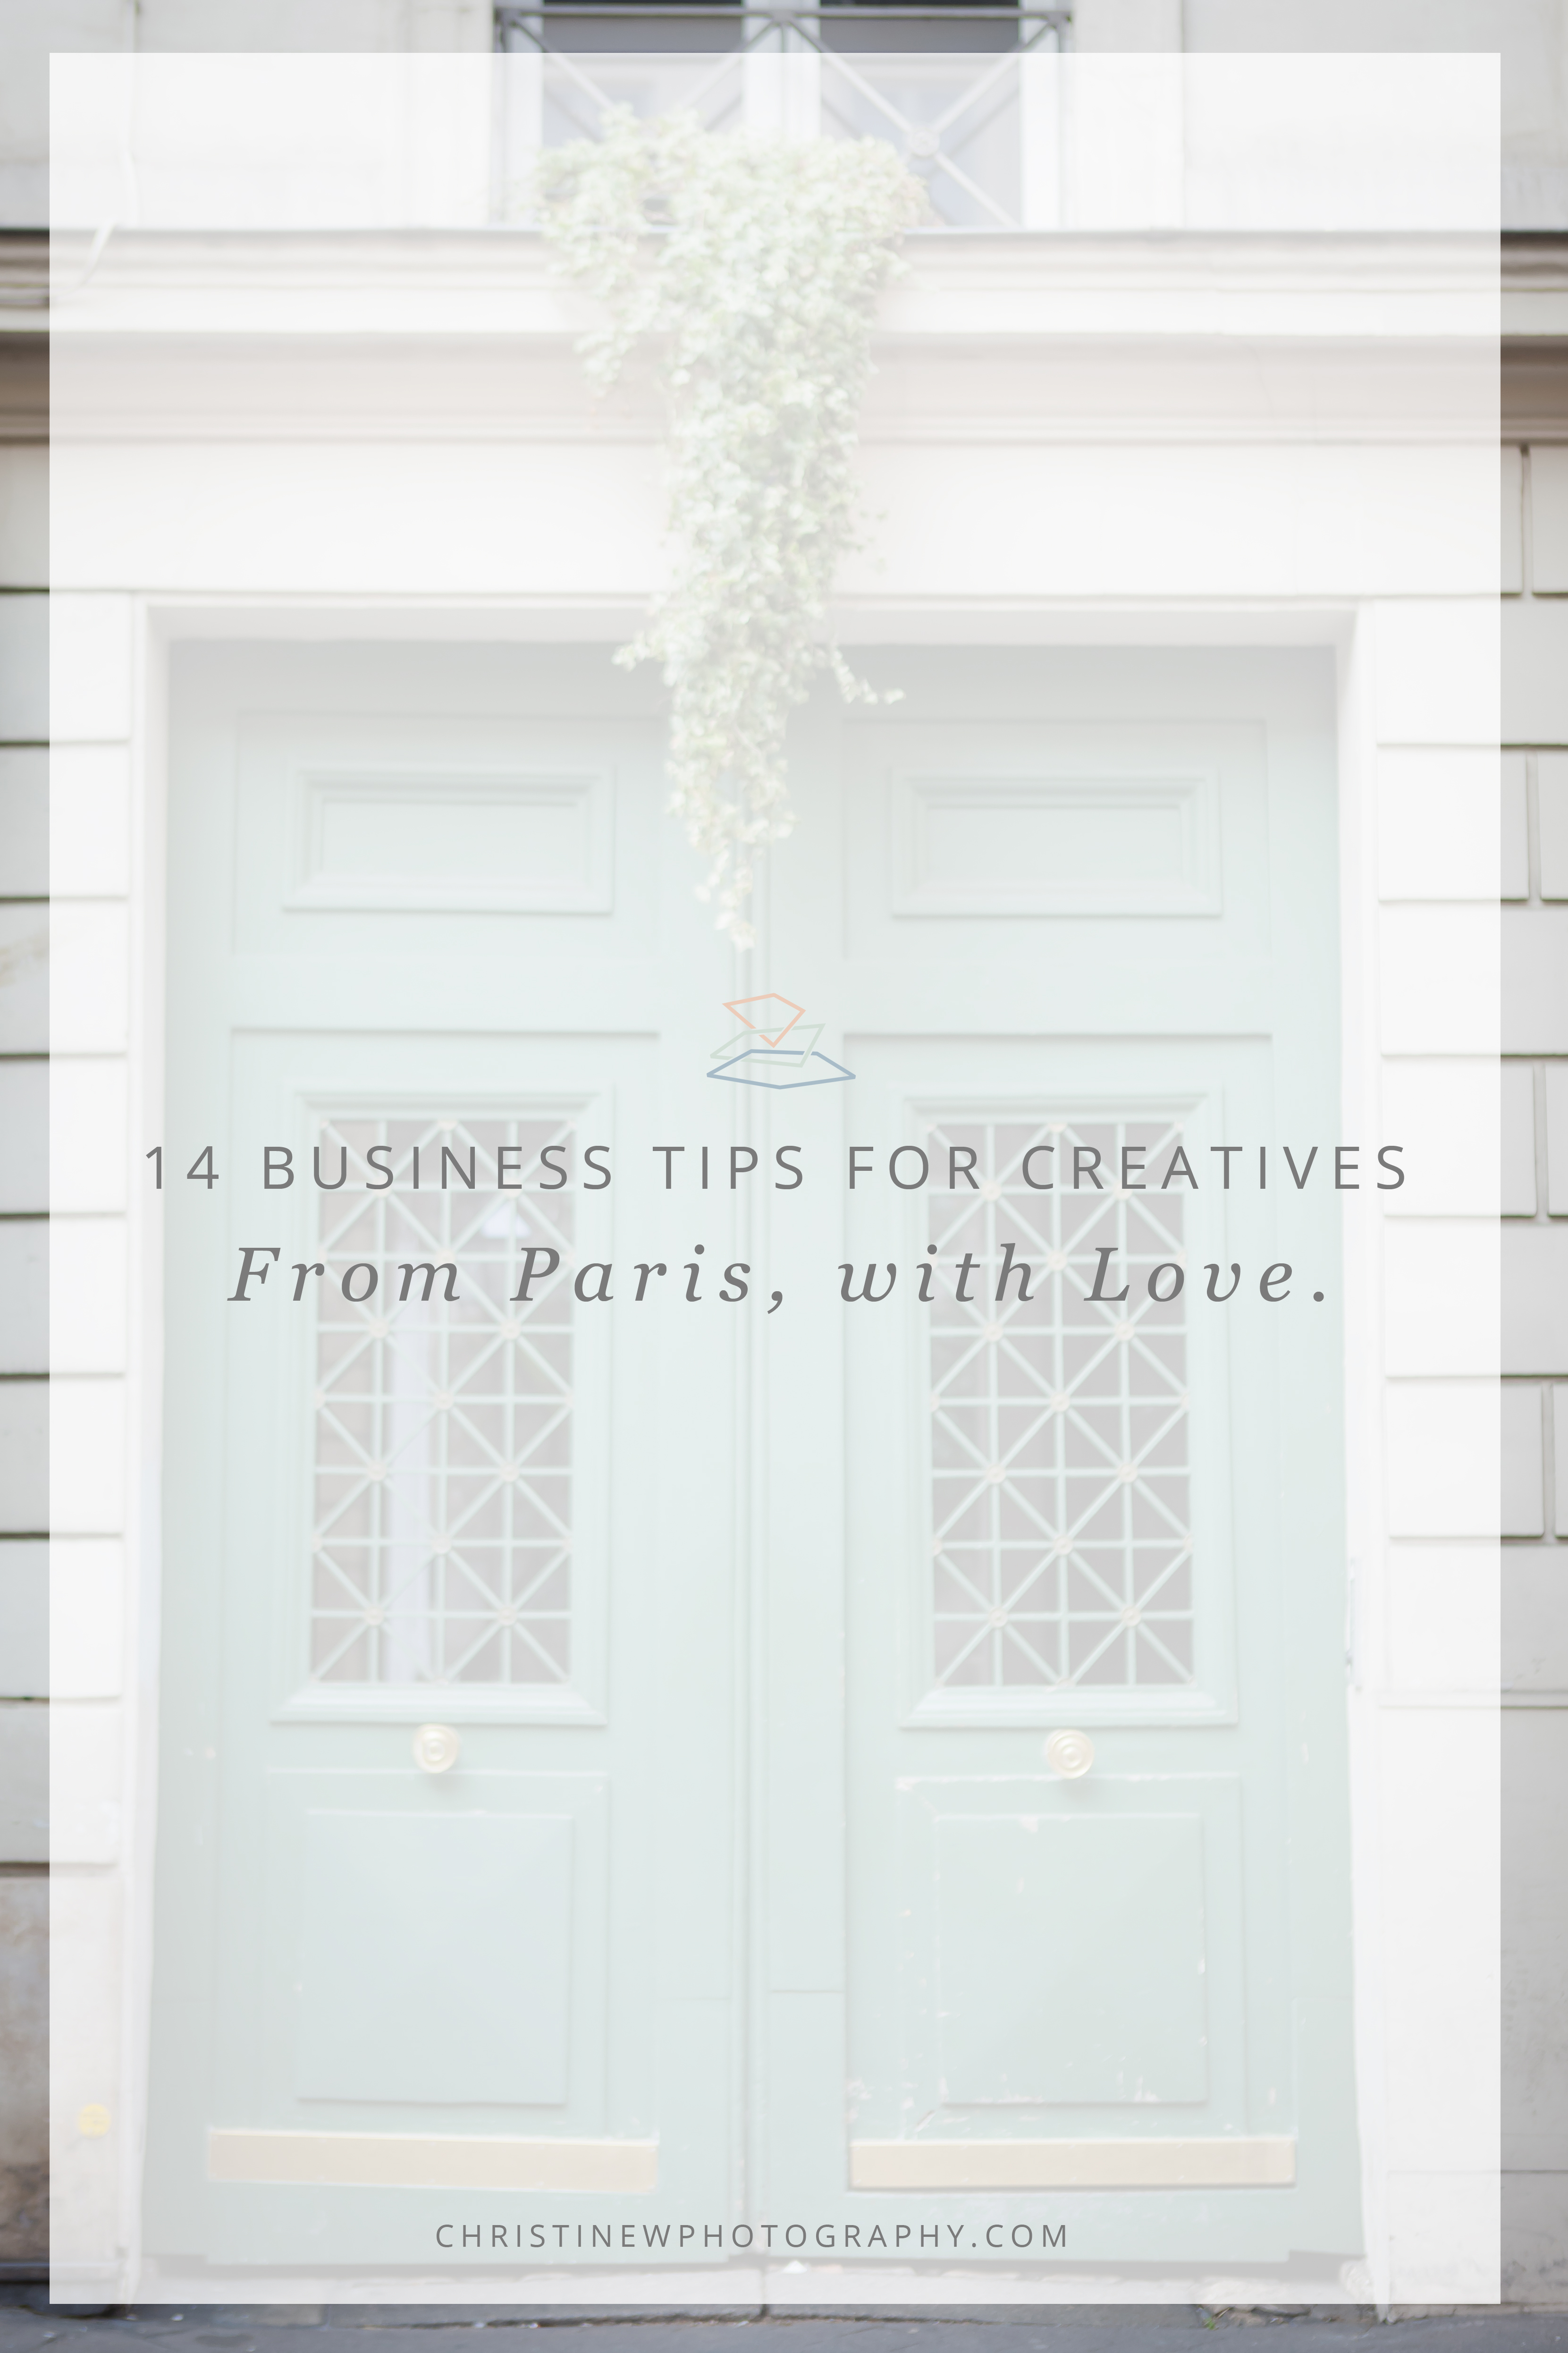 Business tips for creatives 